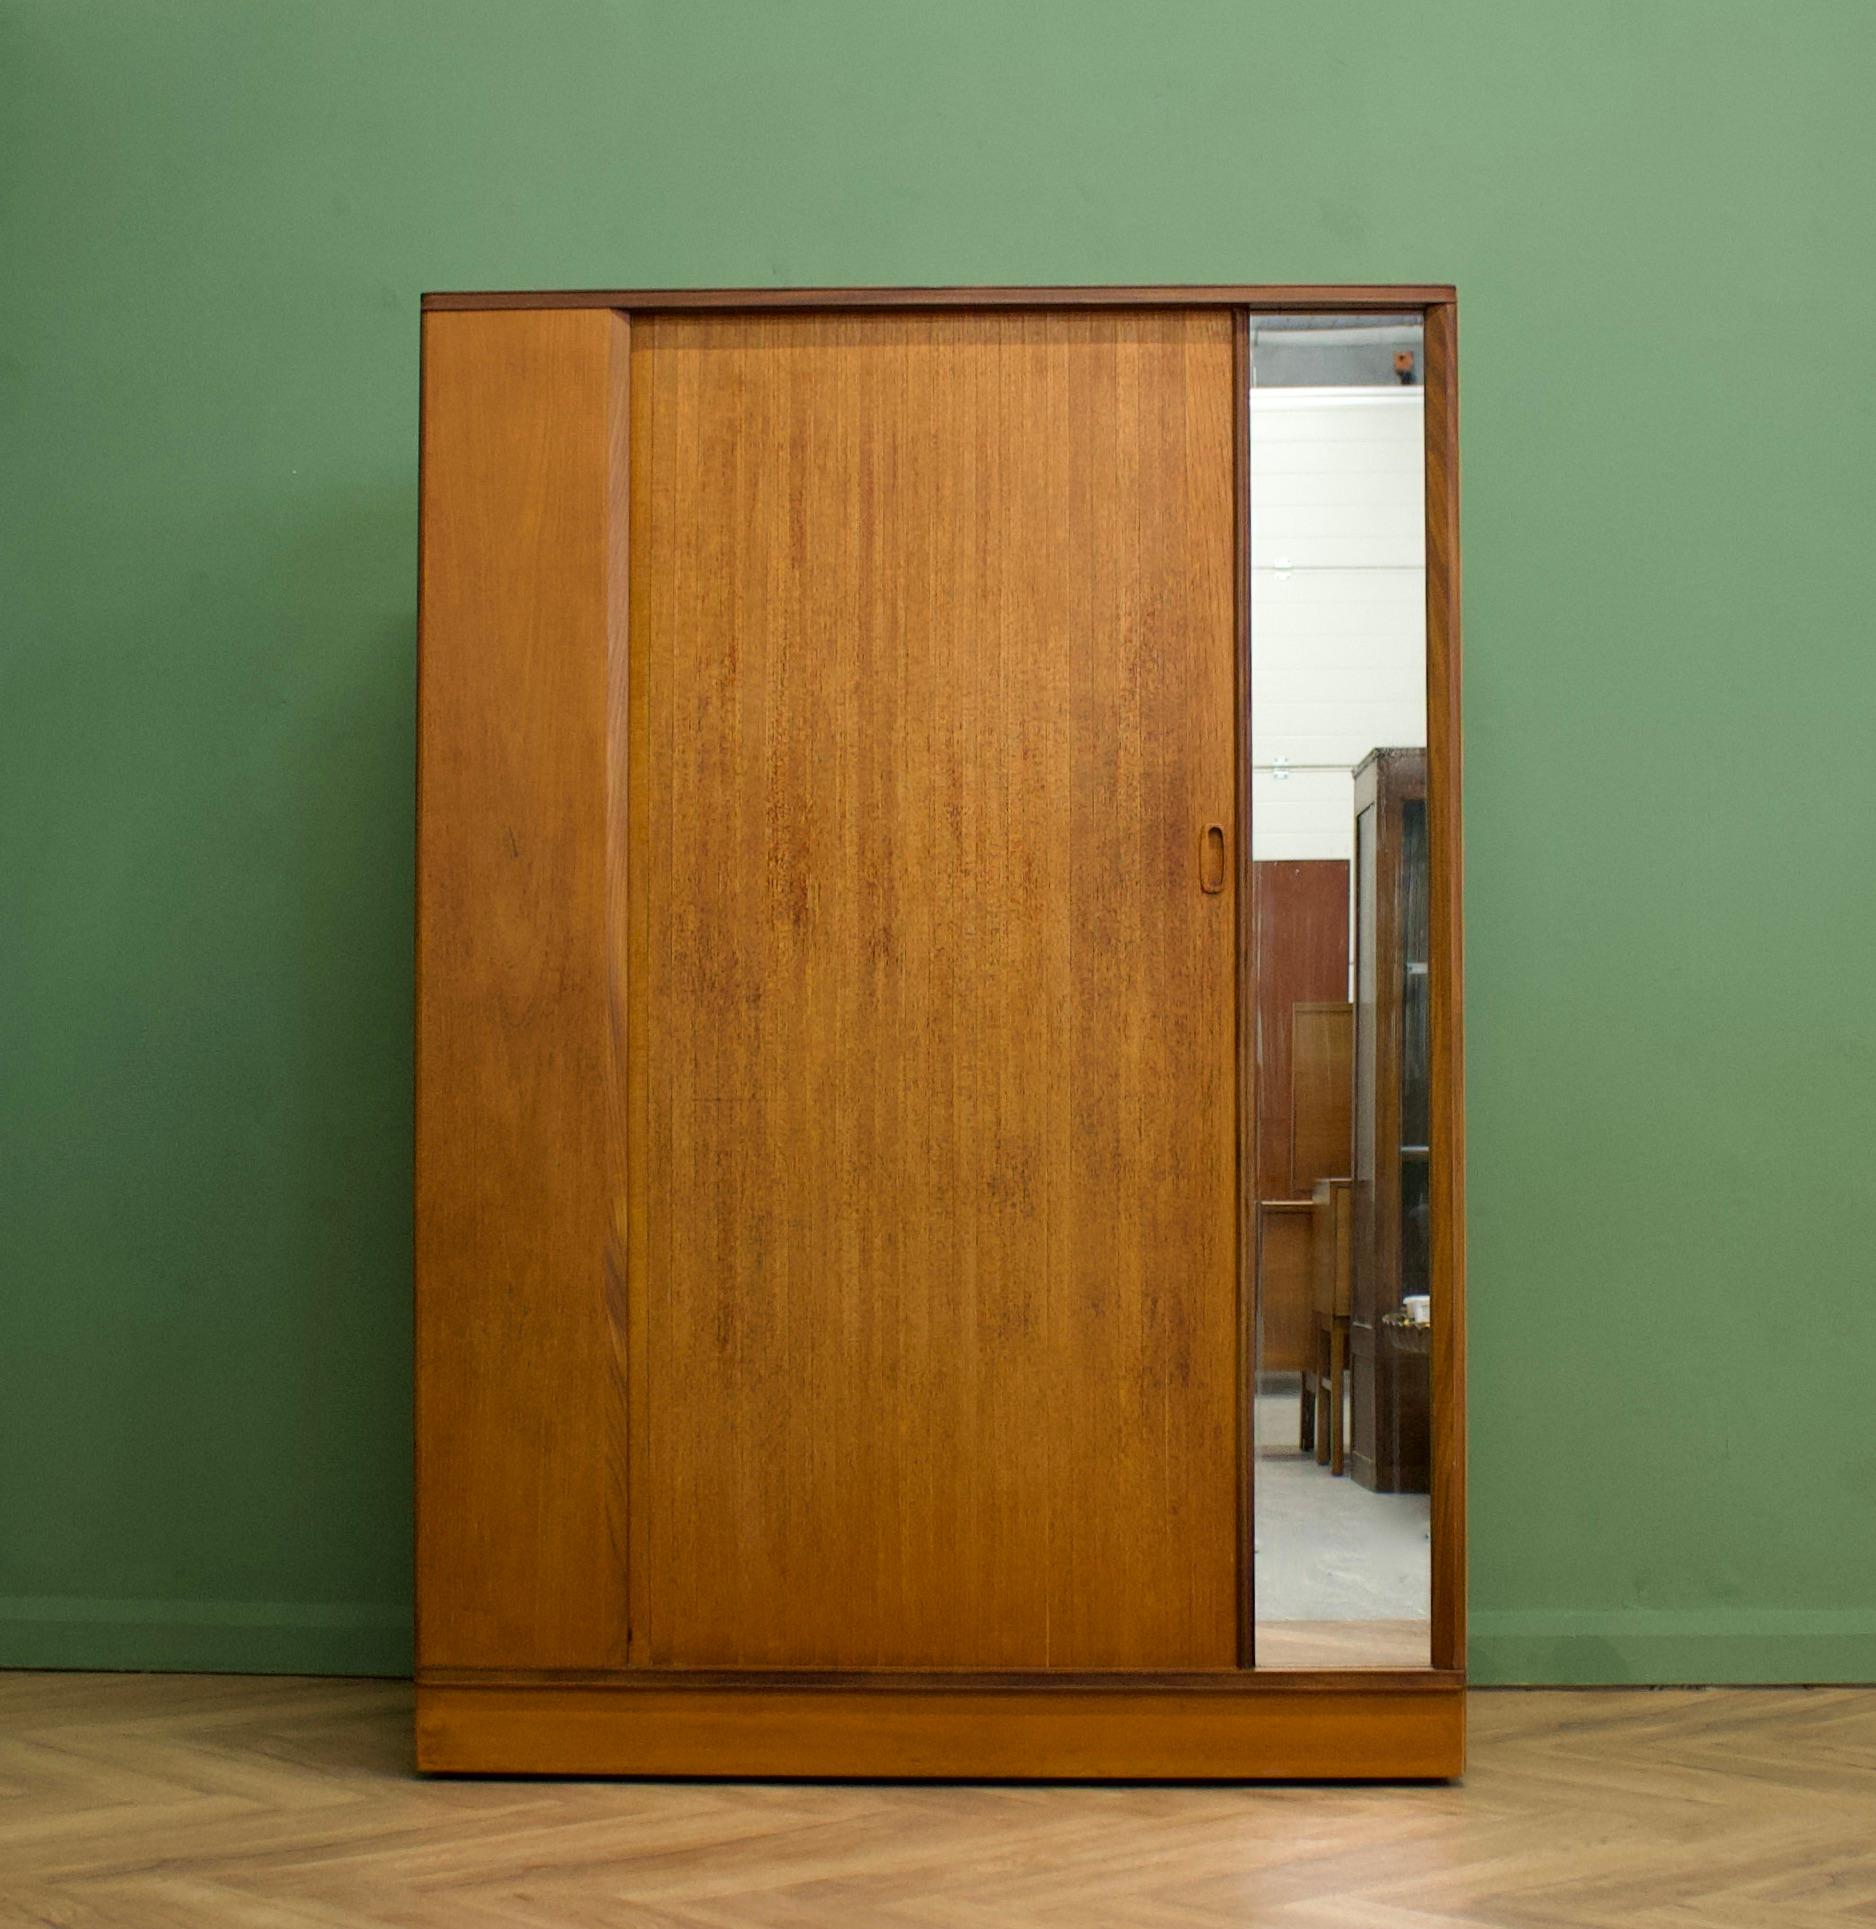 A freestanding teak wardrobe from Austinsuite - standing castors
These Austinsuite wardrobes have a unique design feature of a sliding tambour door - which runs very smooth
There's an external full length mirror - internally there's a hanging rail